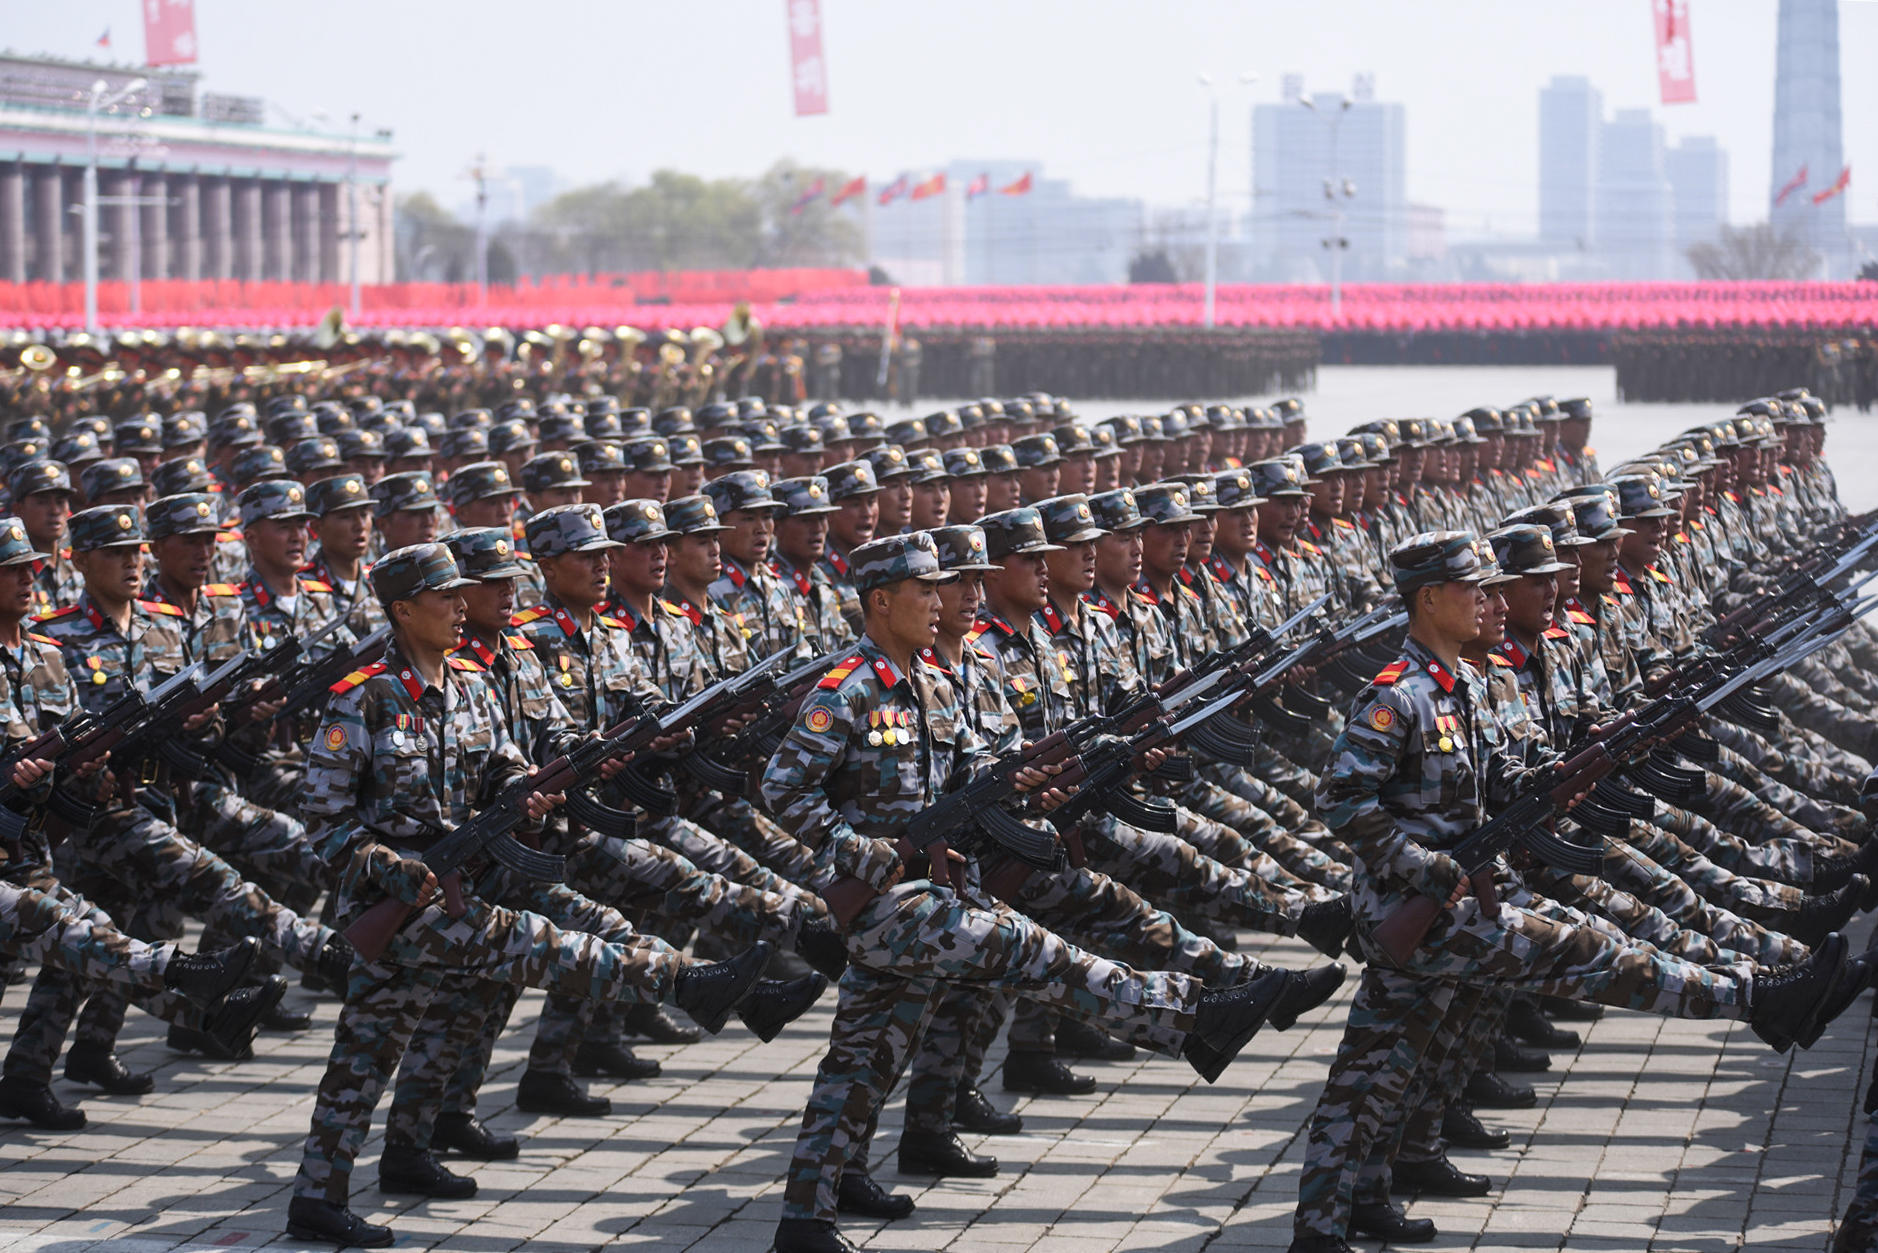 Soldiers attend a military parade in central Pyongyang (Cheng Dayu/Xinhua/Alamy Live News)